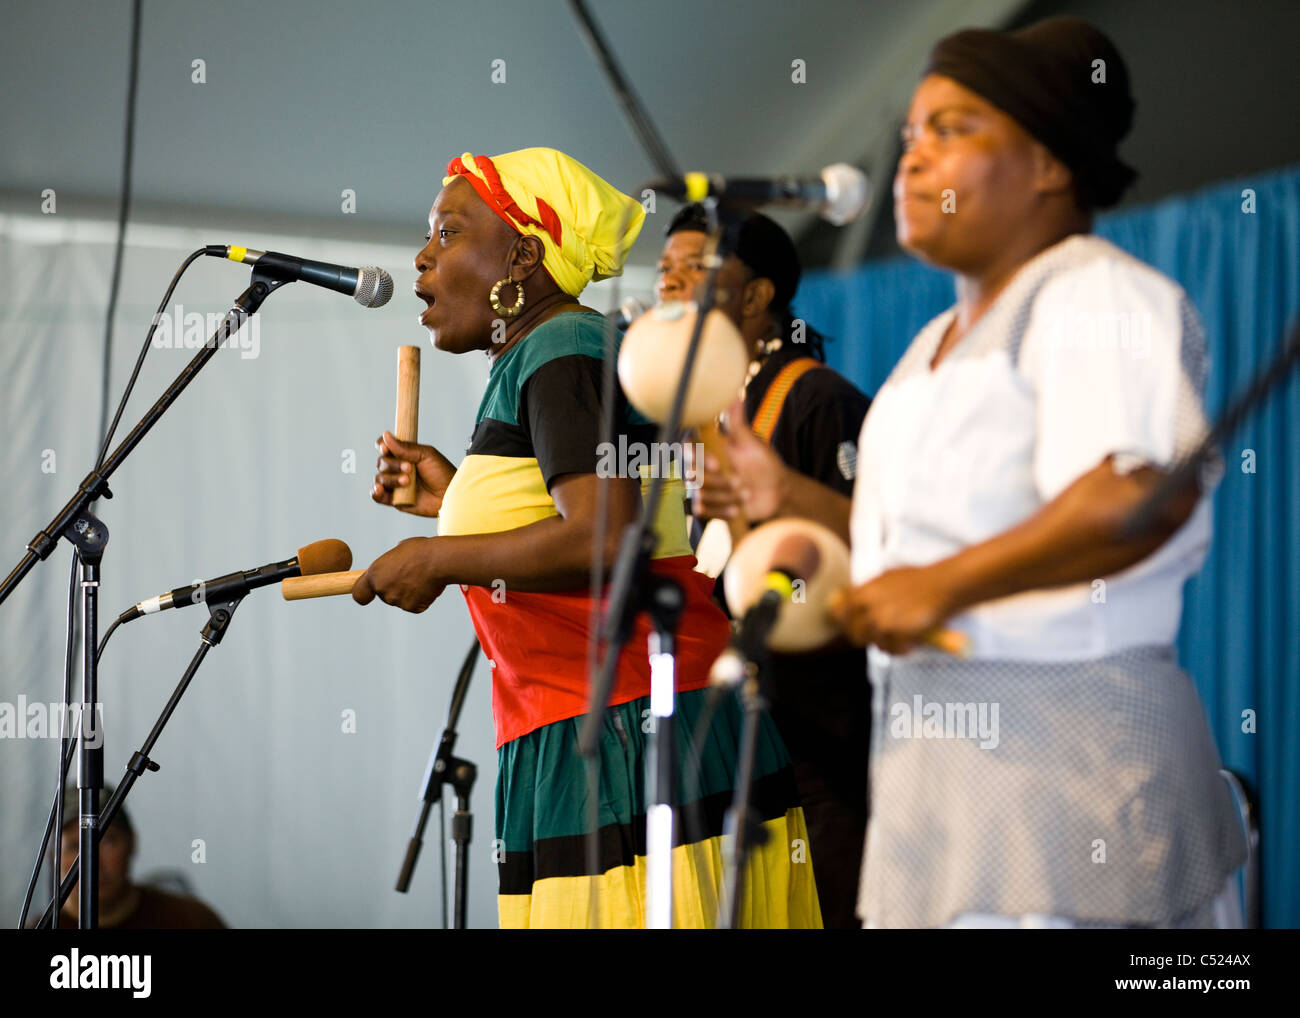 A Garifuna music performers on stage Stock Photo